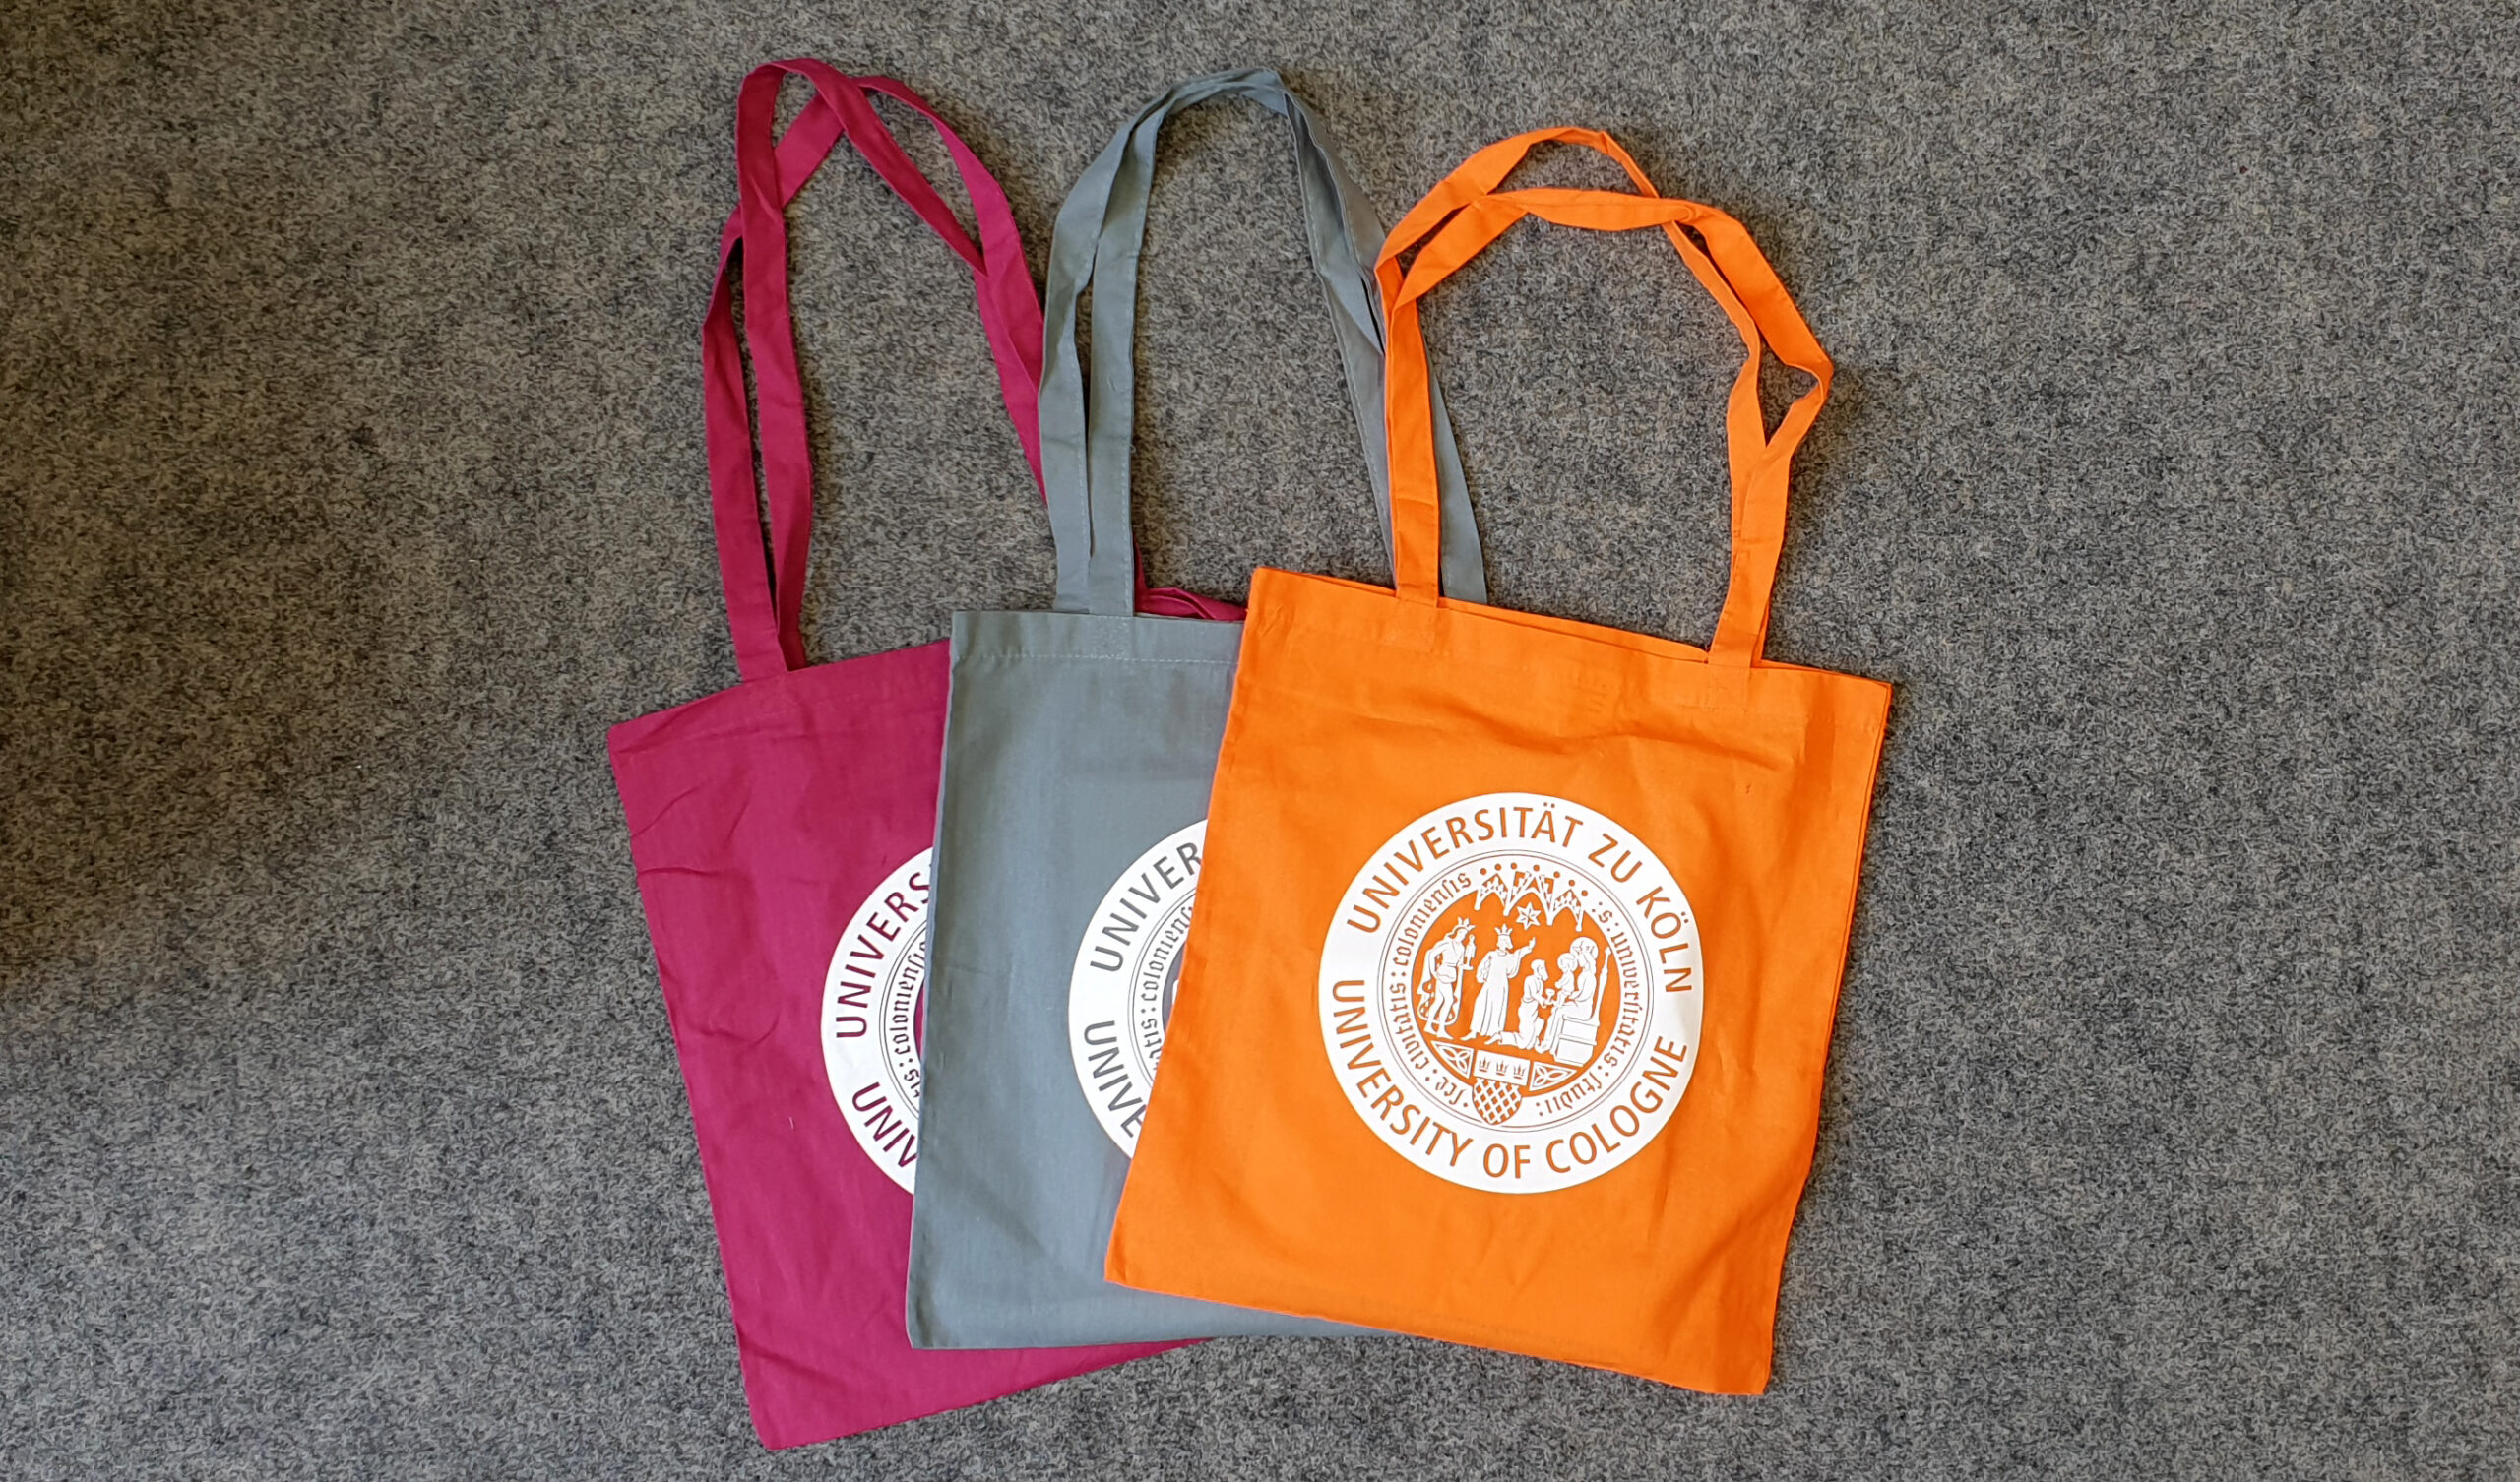 Three bags with the emblem of the University of Cologne on them